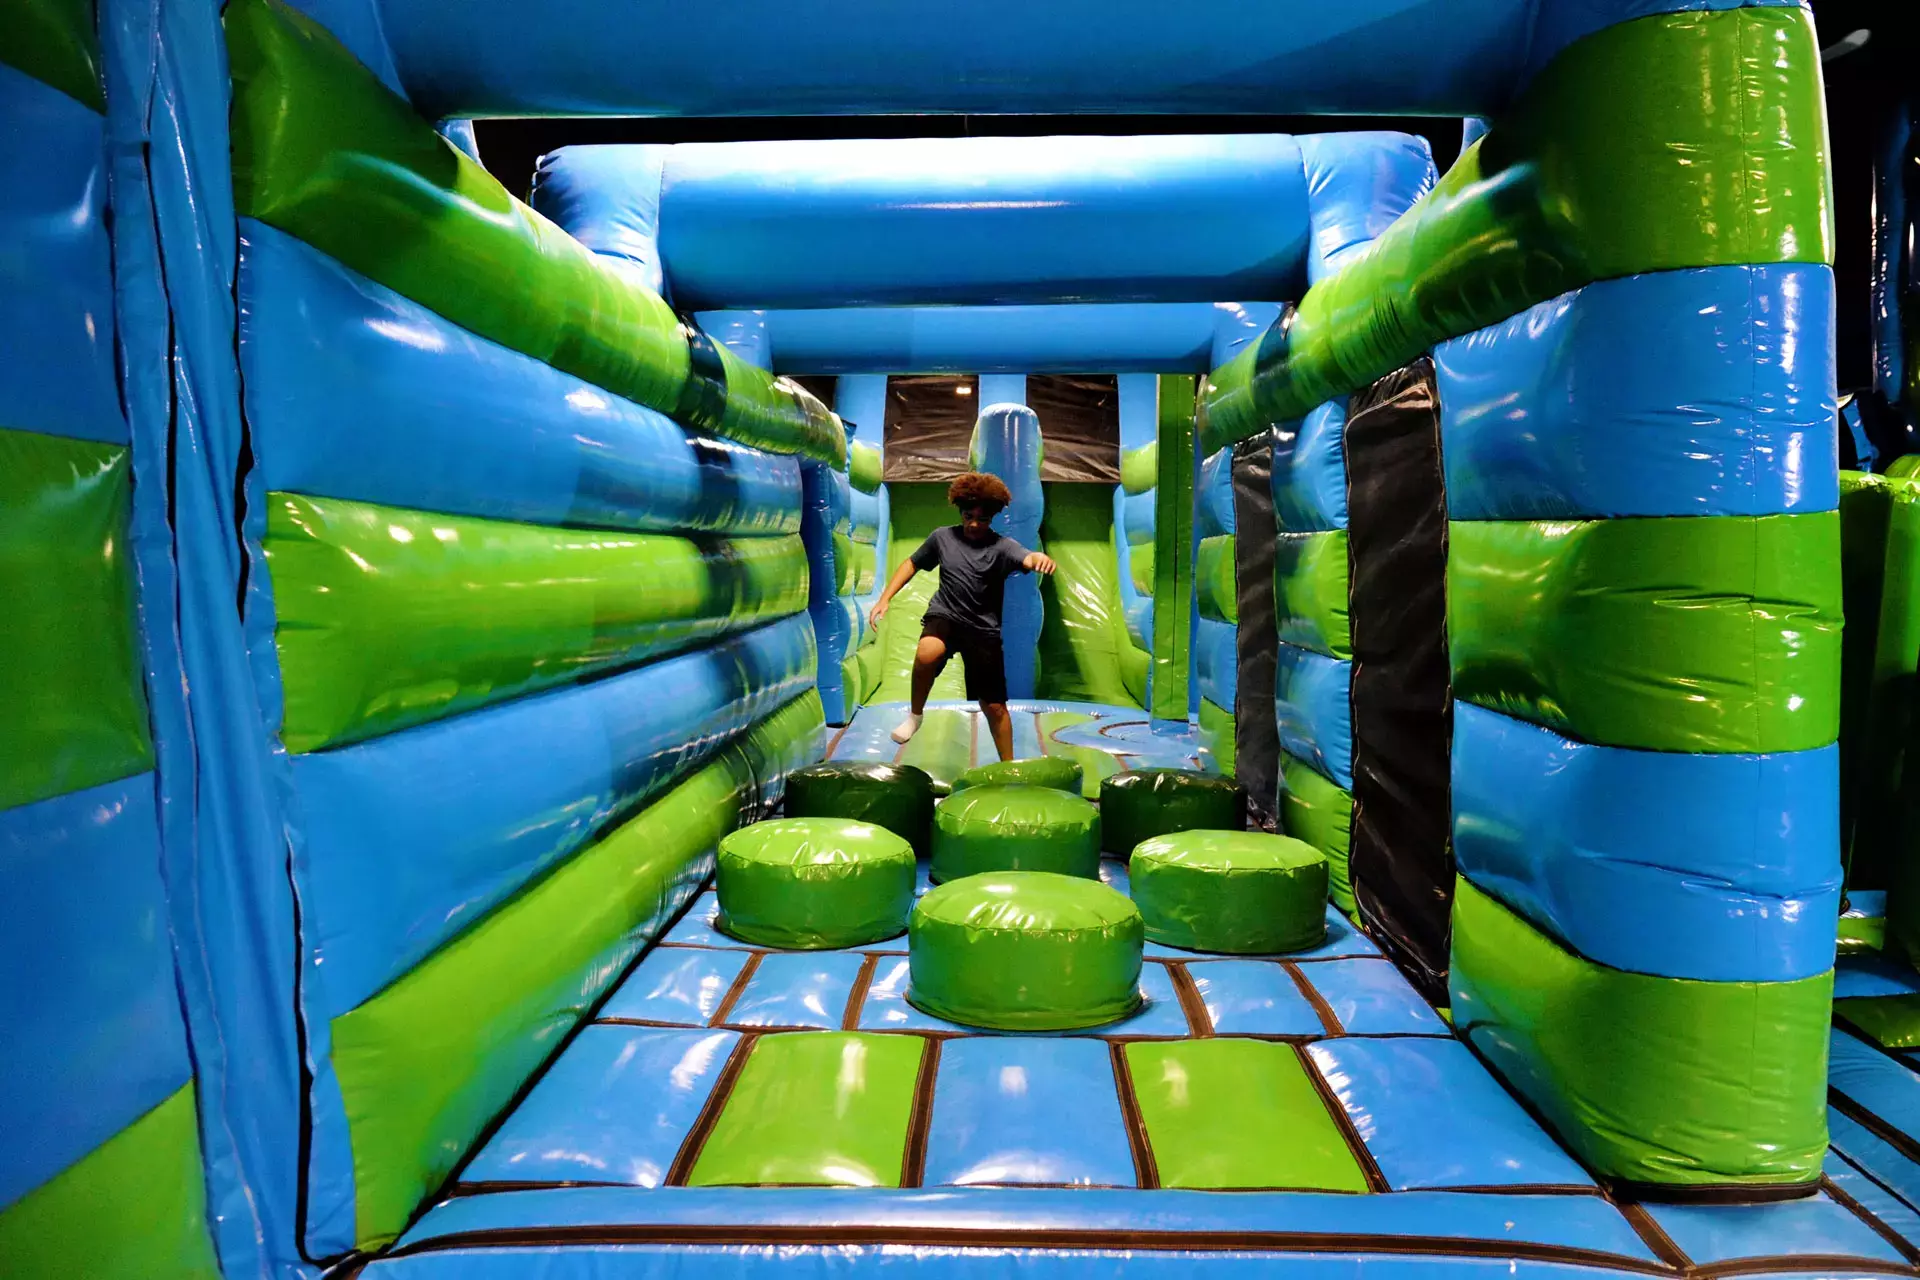 Boy running over bouncy air filled bubbles in an inflatapark.